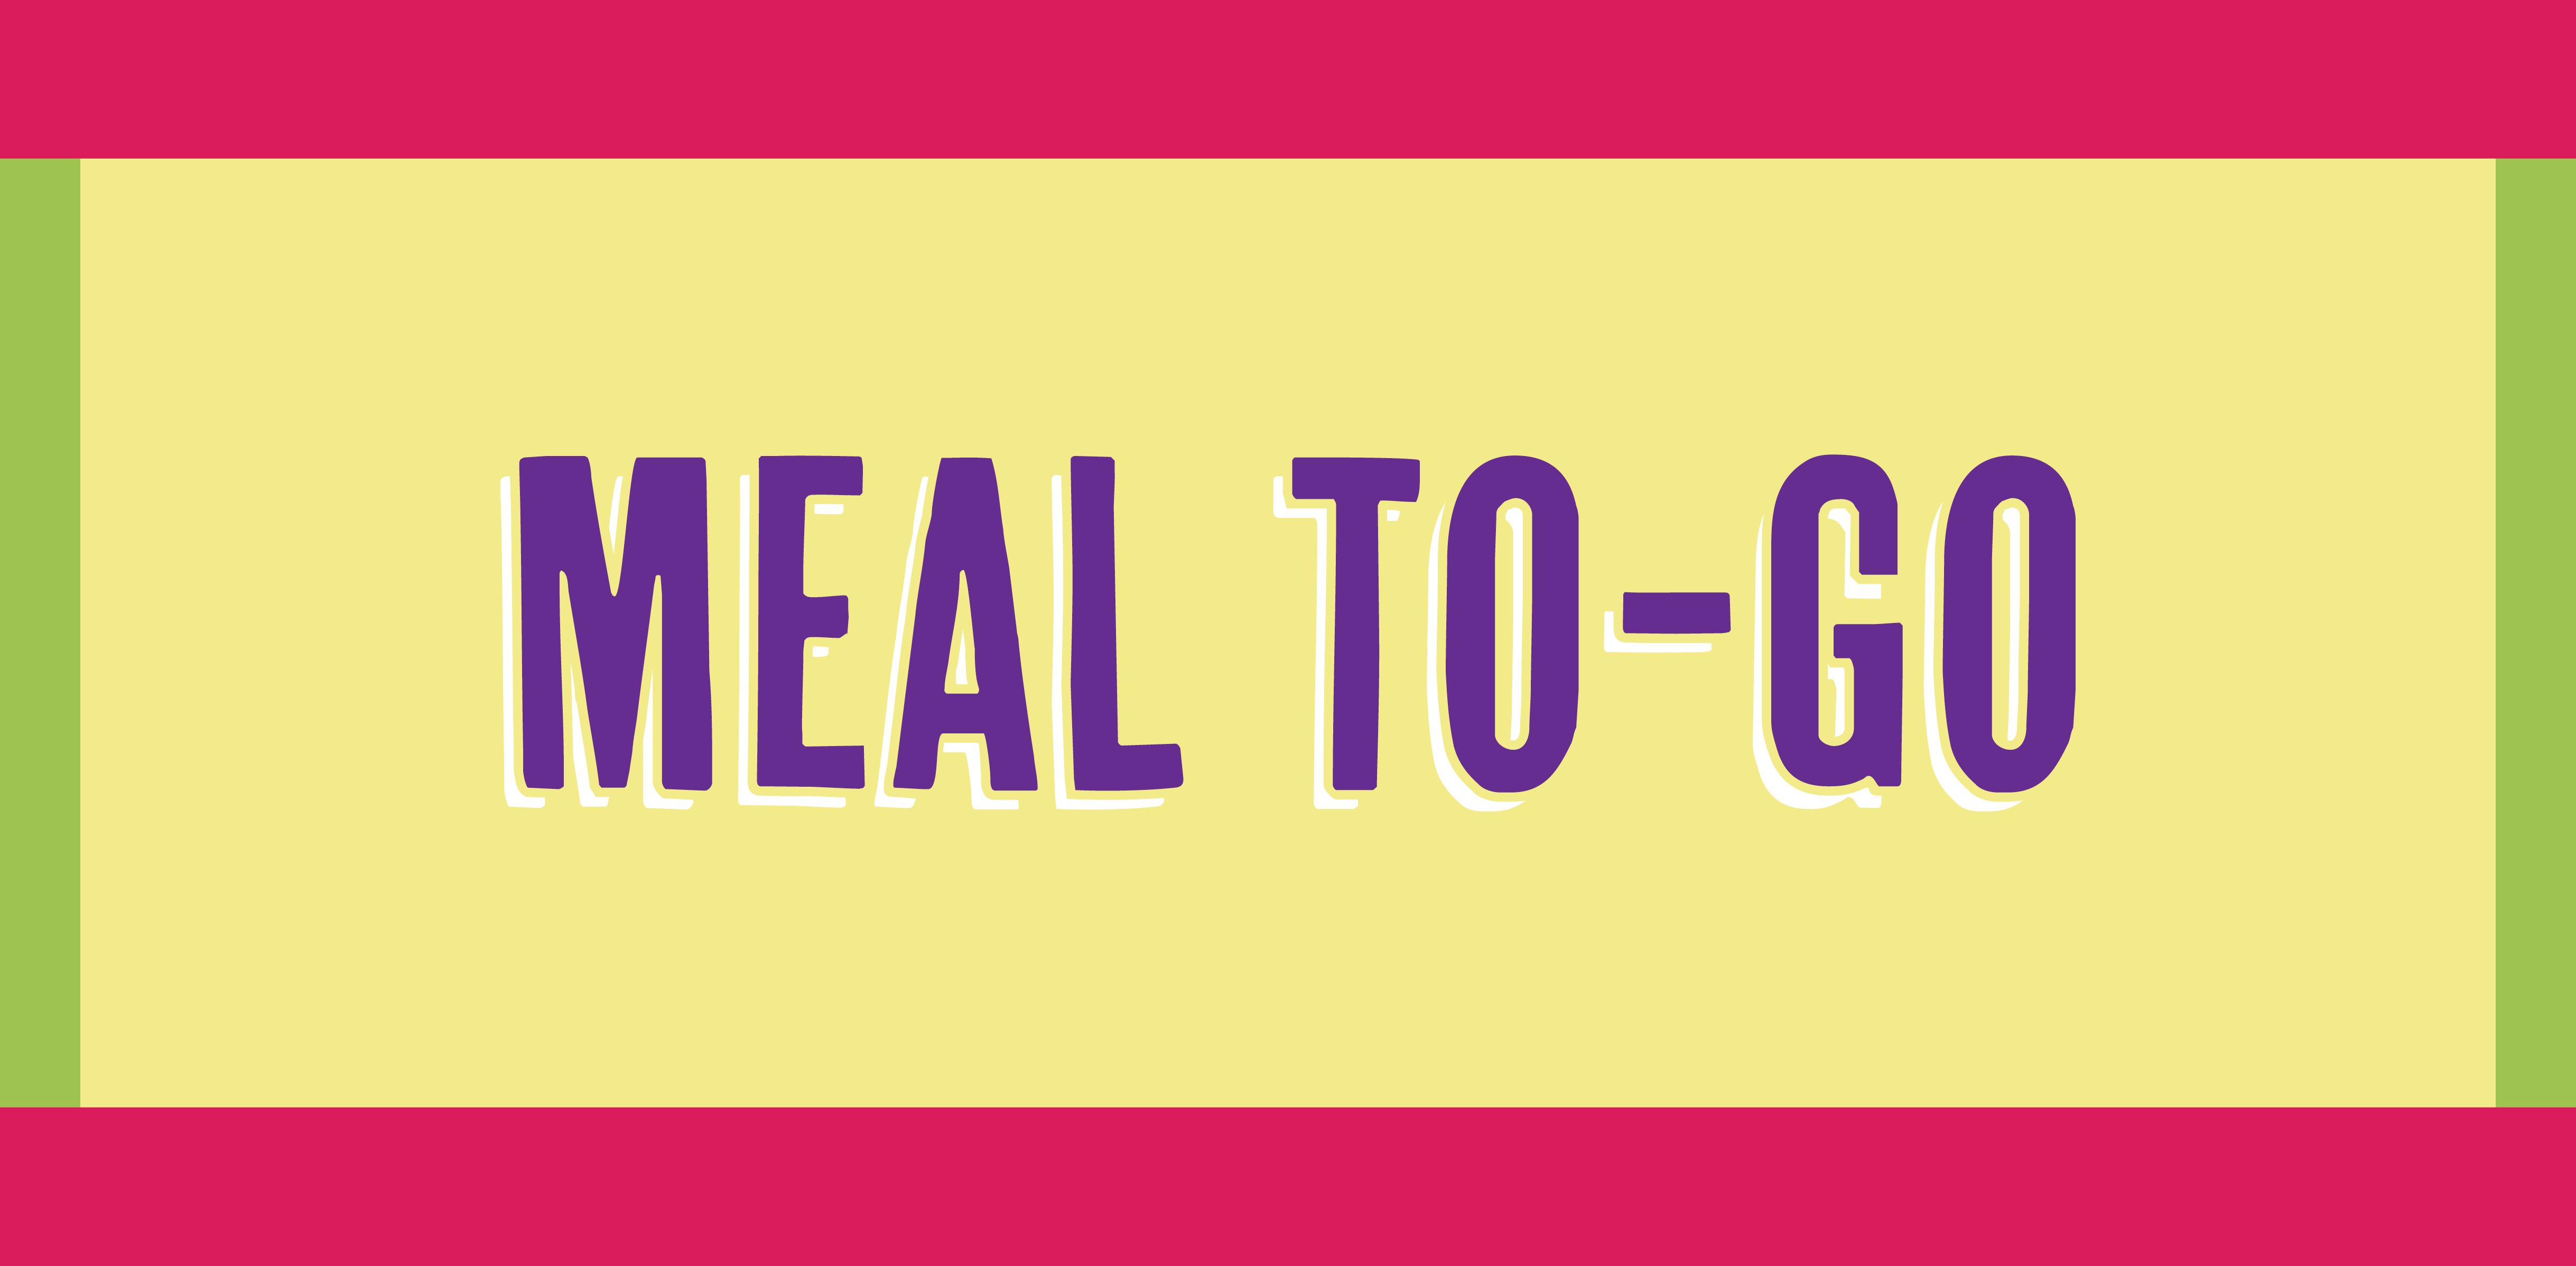 A graphic with a pink and green border and "Meal To-Go" typed in a purple font.